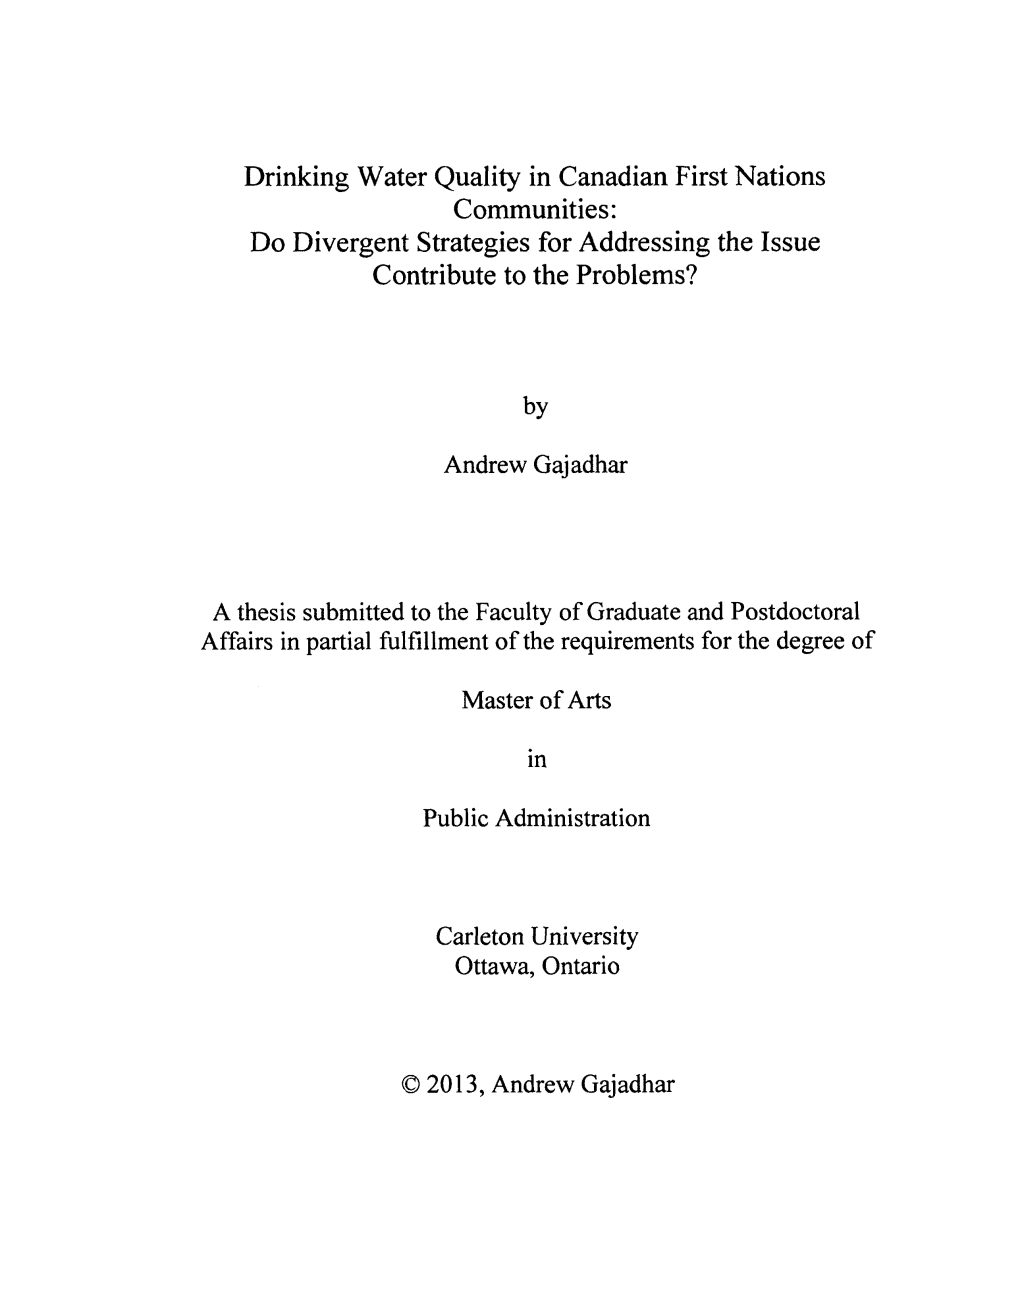 Drinking Water Quality in Canadian First Nations Communities: Do Divergent Strategies for Addressing the Issue Contribute to the Problems?